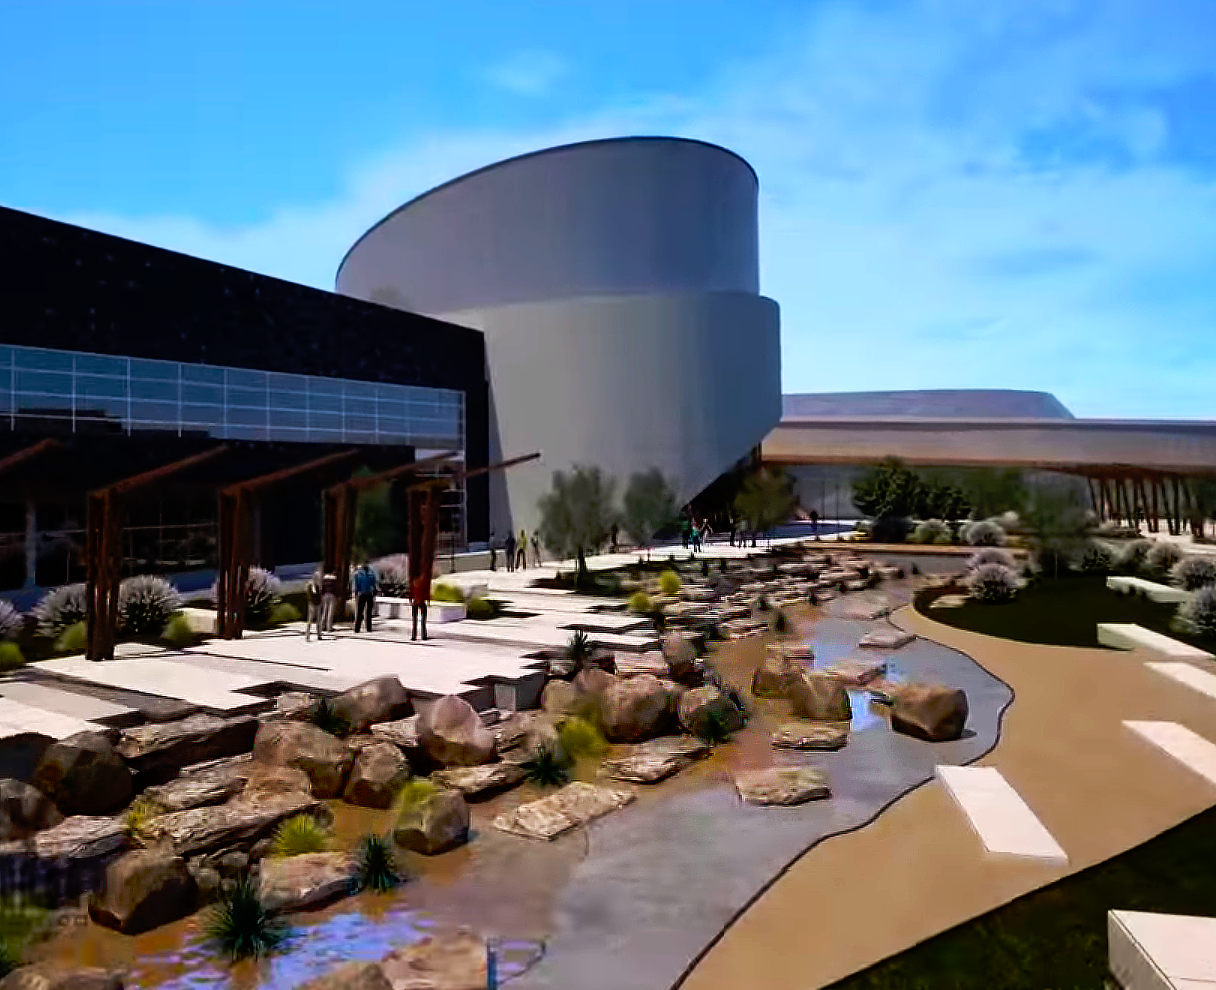 This is a 3d rendered image developed by Trinity Animation for the real estate 3d rendering exhibiting the Bluhawk mall. This specific image displayed the realistically rendered organic material such as water, rock, and foliage that is located throughout the mall.